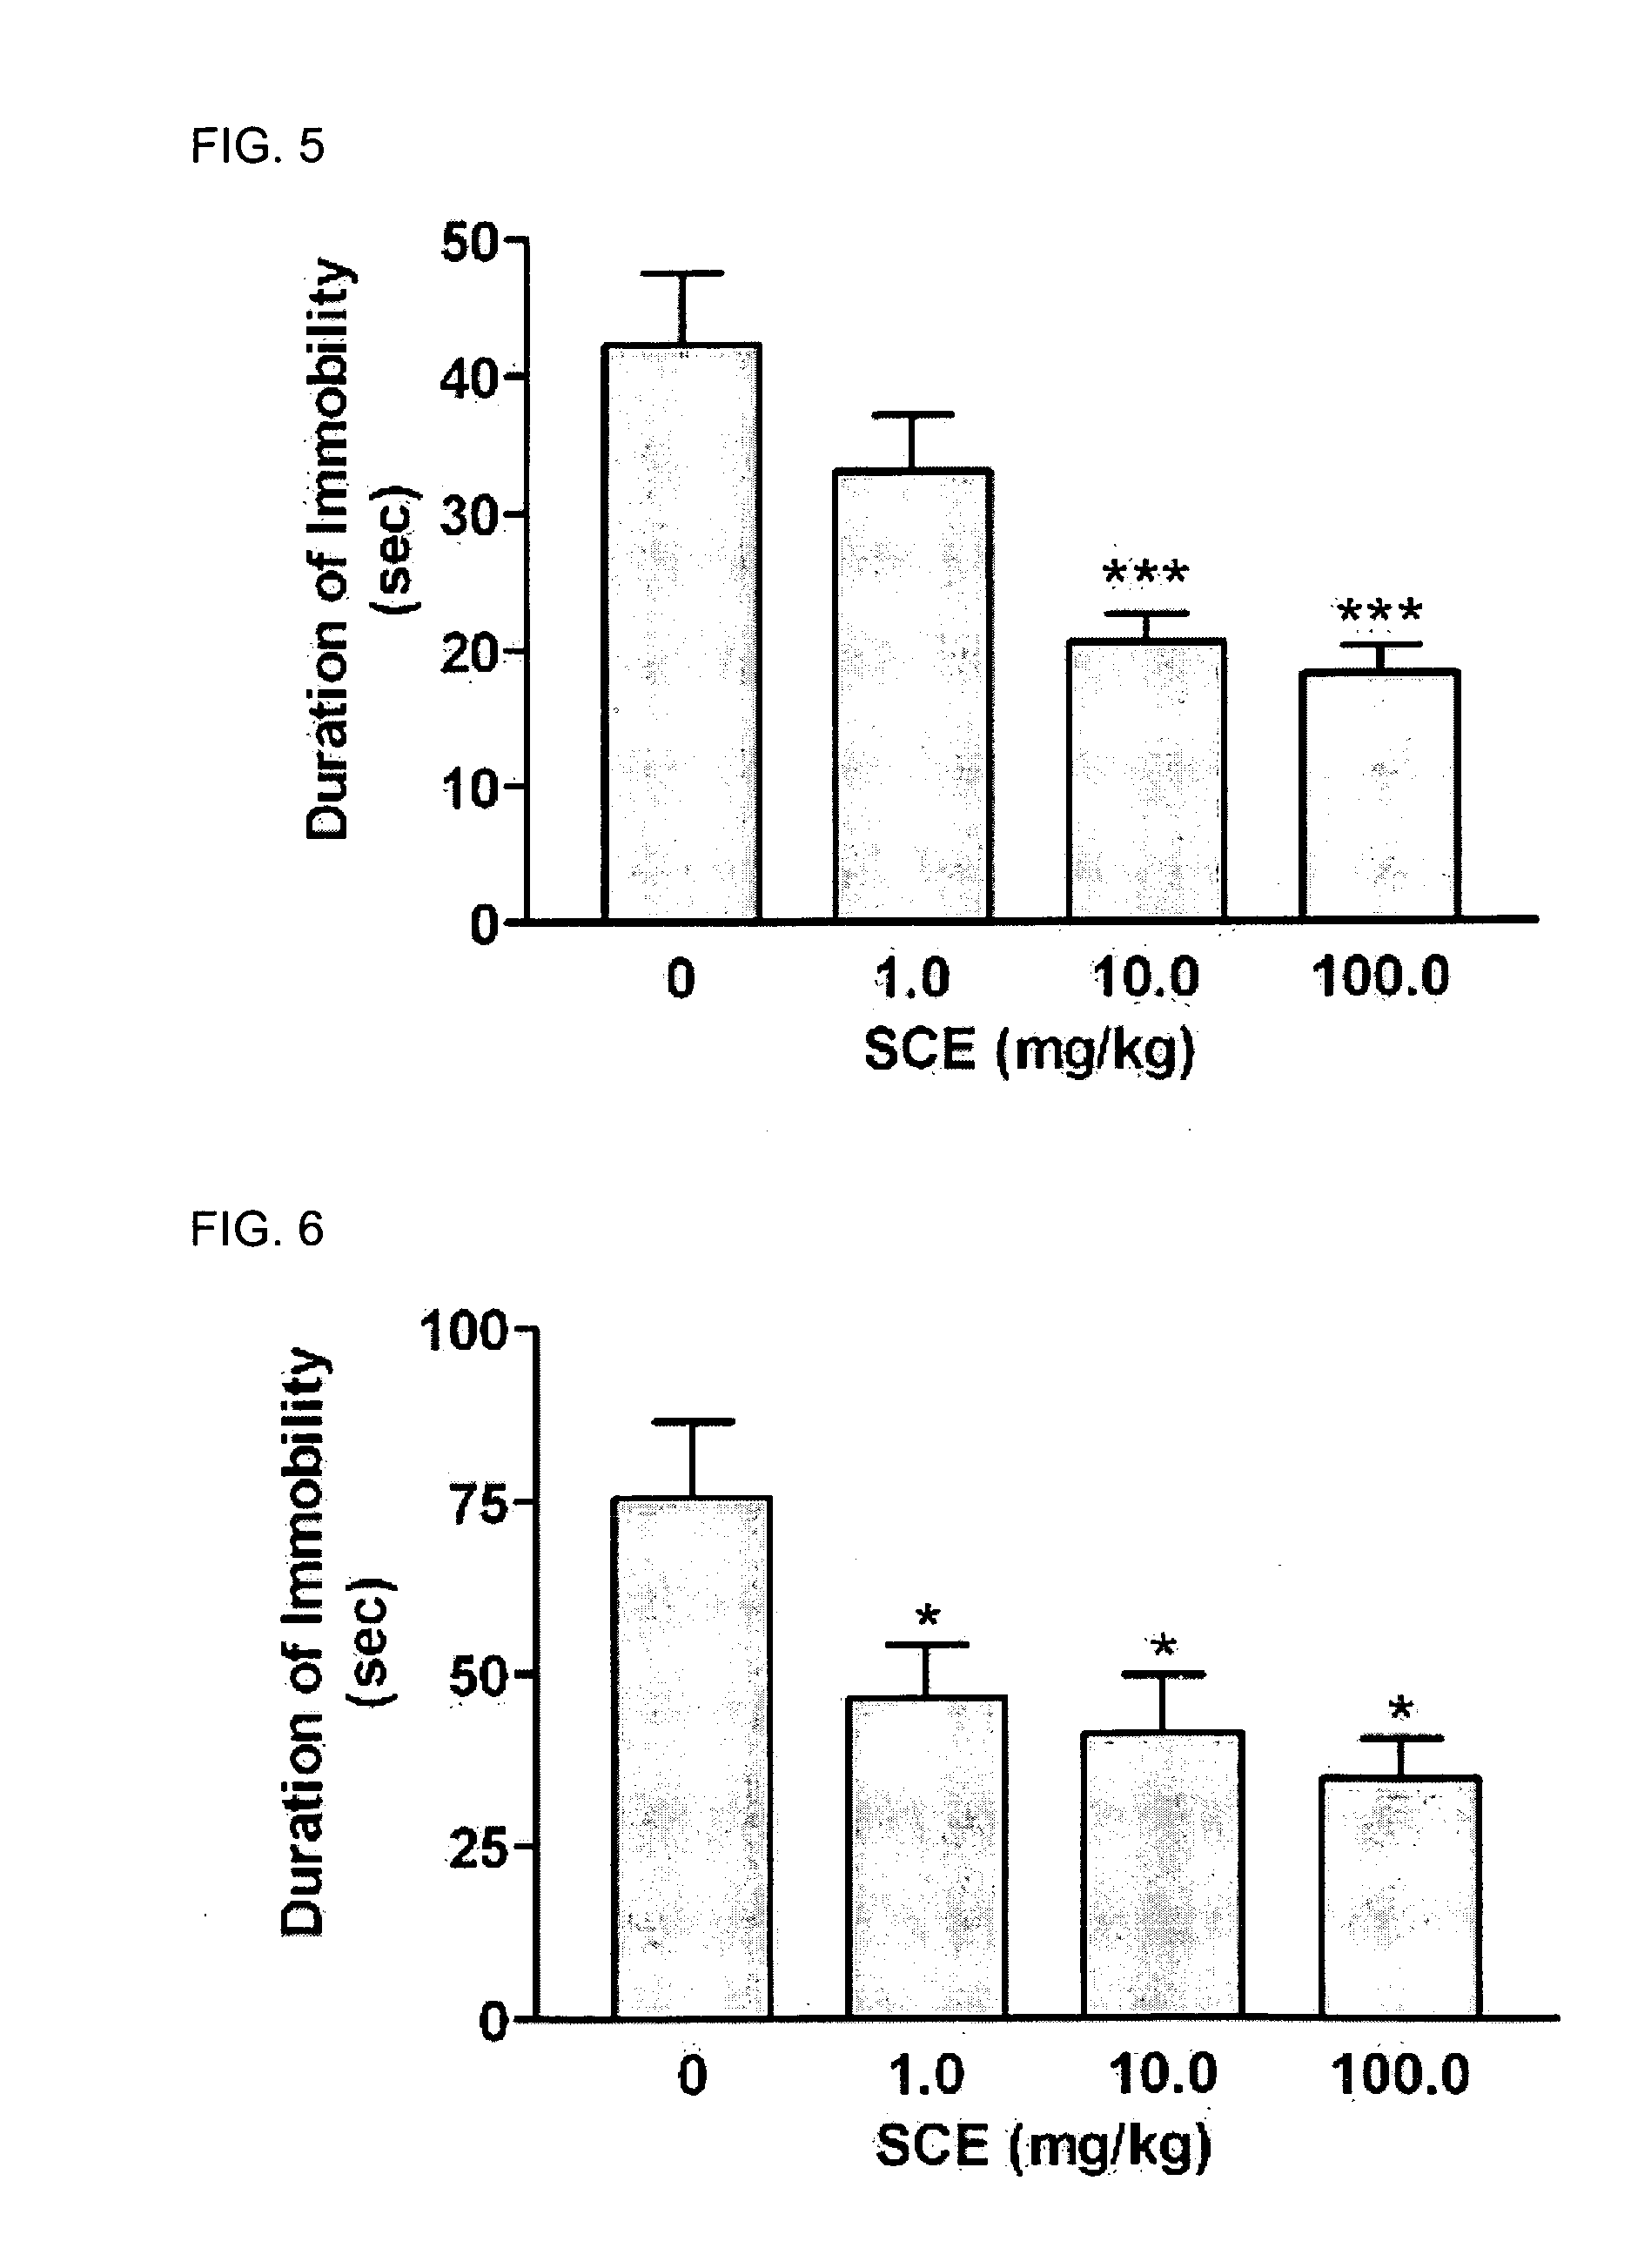 Method for selectively inhibiting reuptake of serotonin and norepinephrine using yeast extract